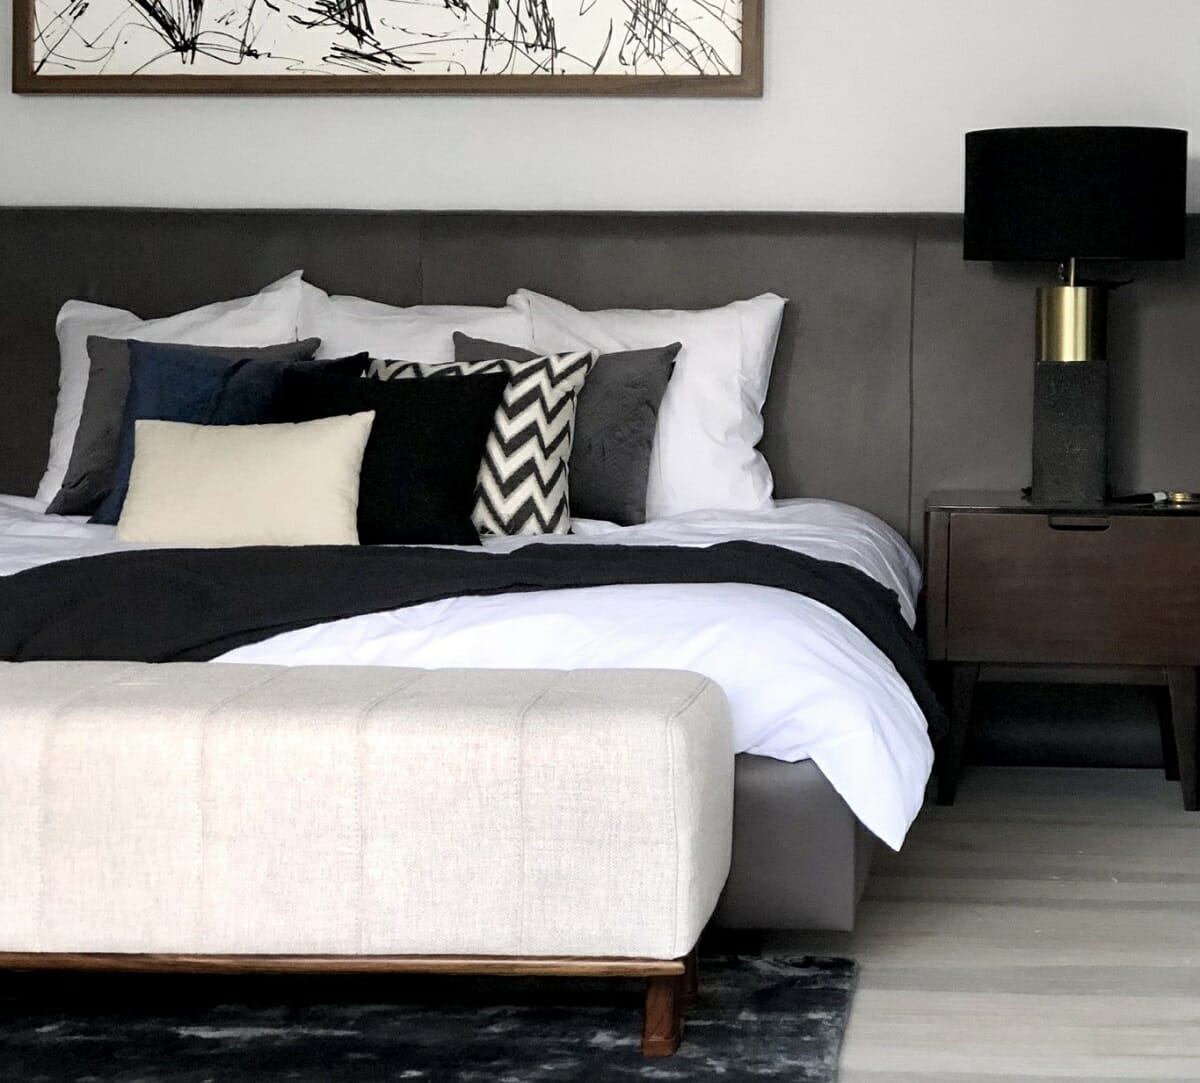 Simple king bed pillow arrangement with a black and white color scheme